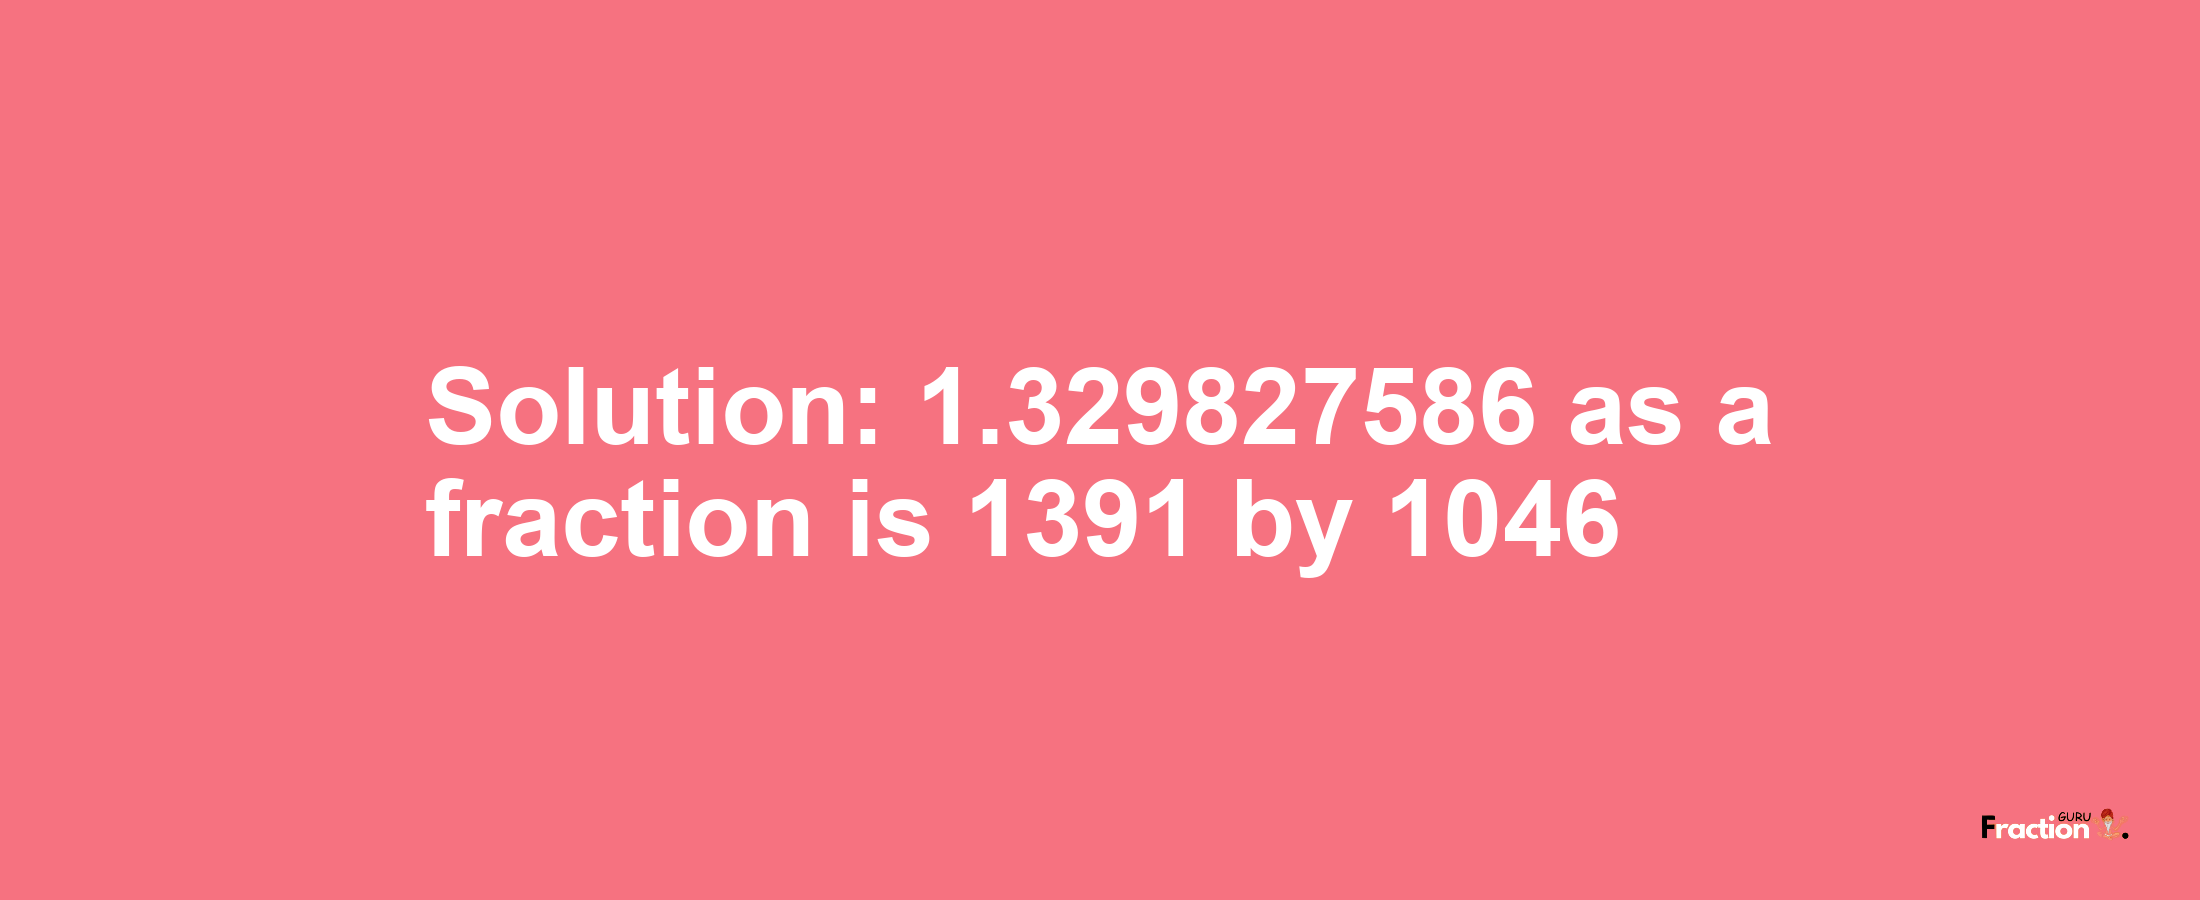 Solution:1.329827586 as a fraction is 1391/1046